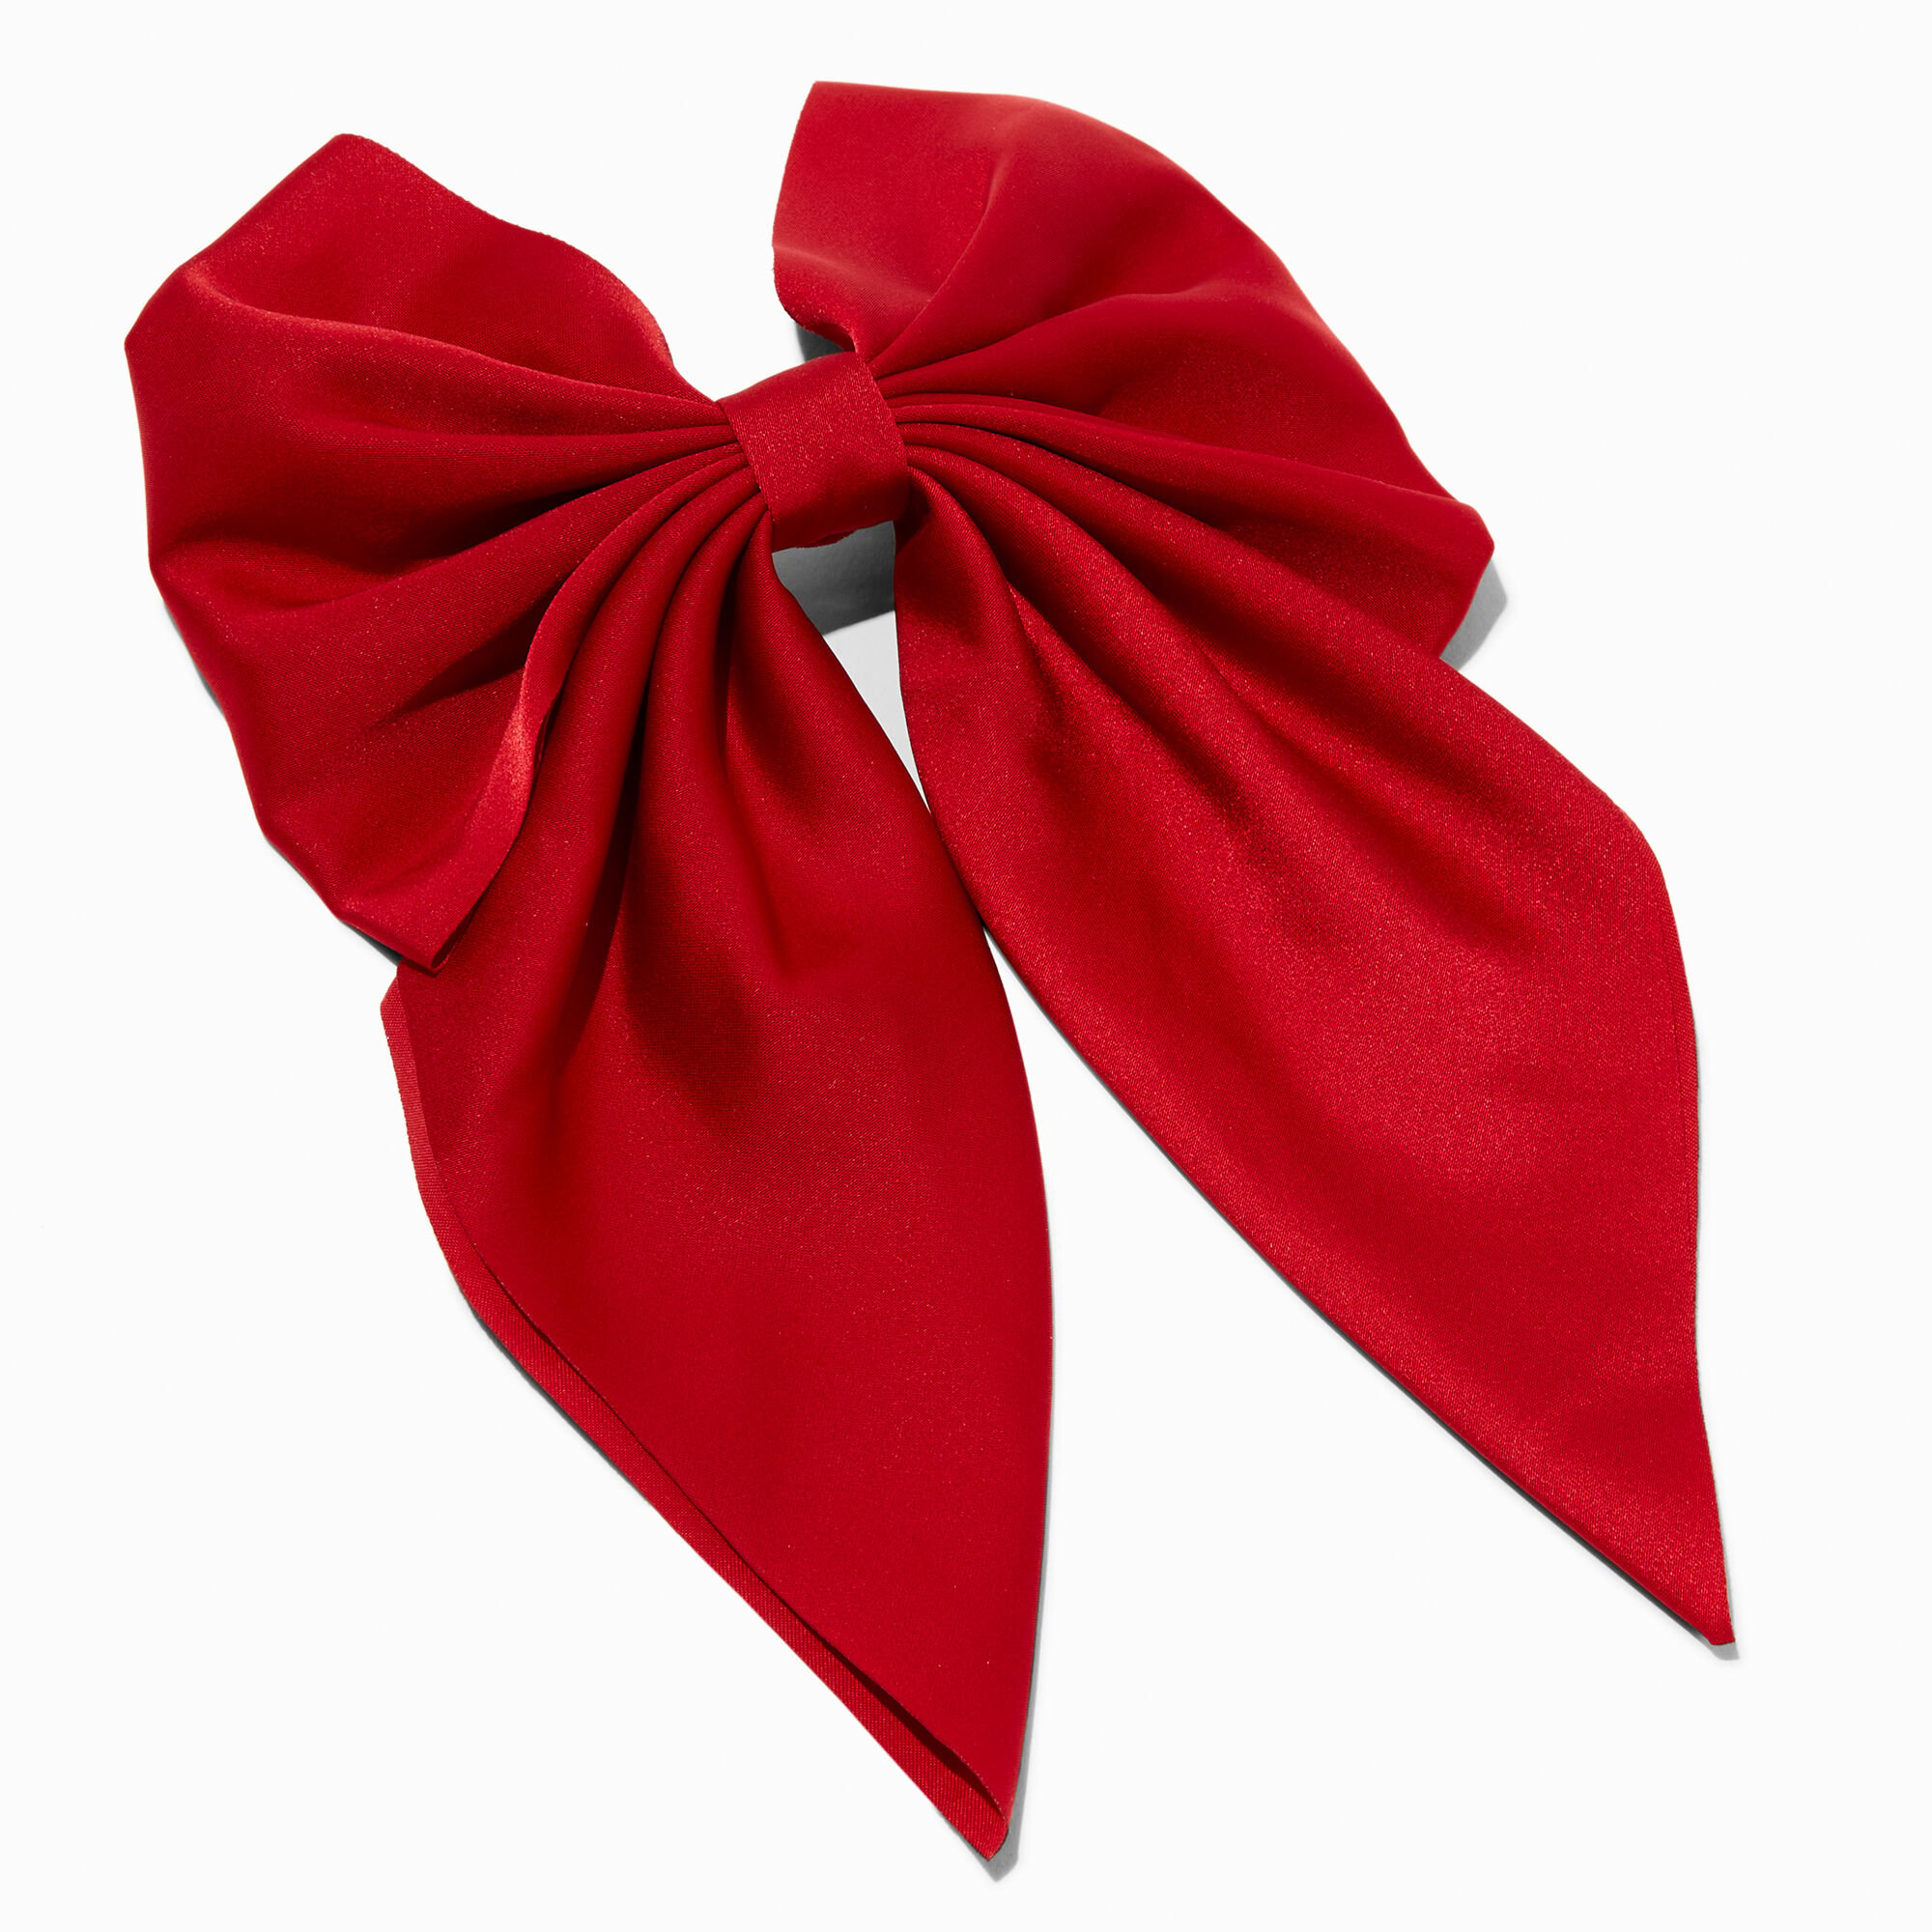 View Claires Satin Bow Barrette Hair Clip Red information